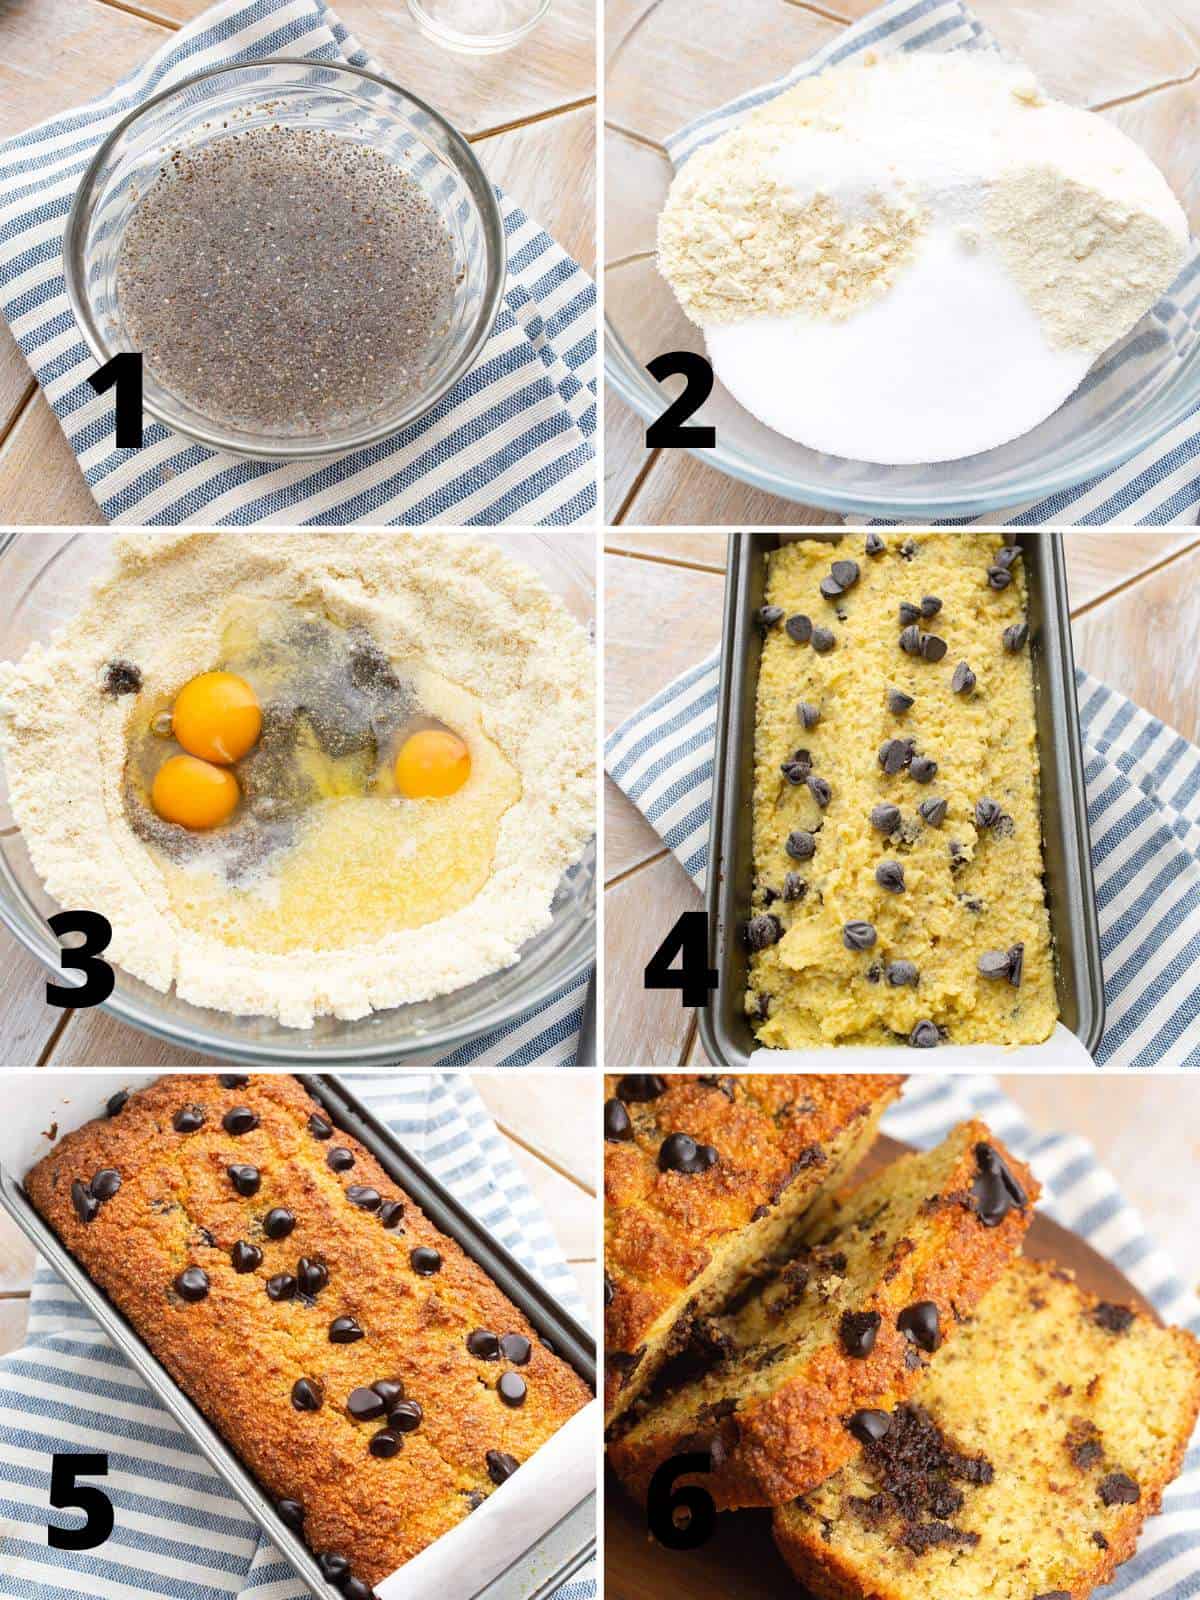 A collage of 6 images showing how to make Keto Banana Bread.